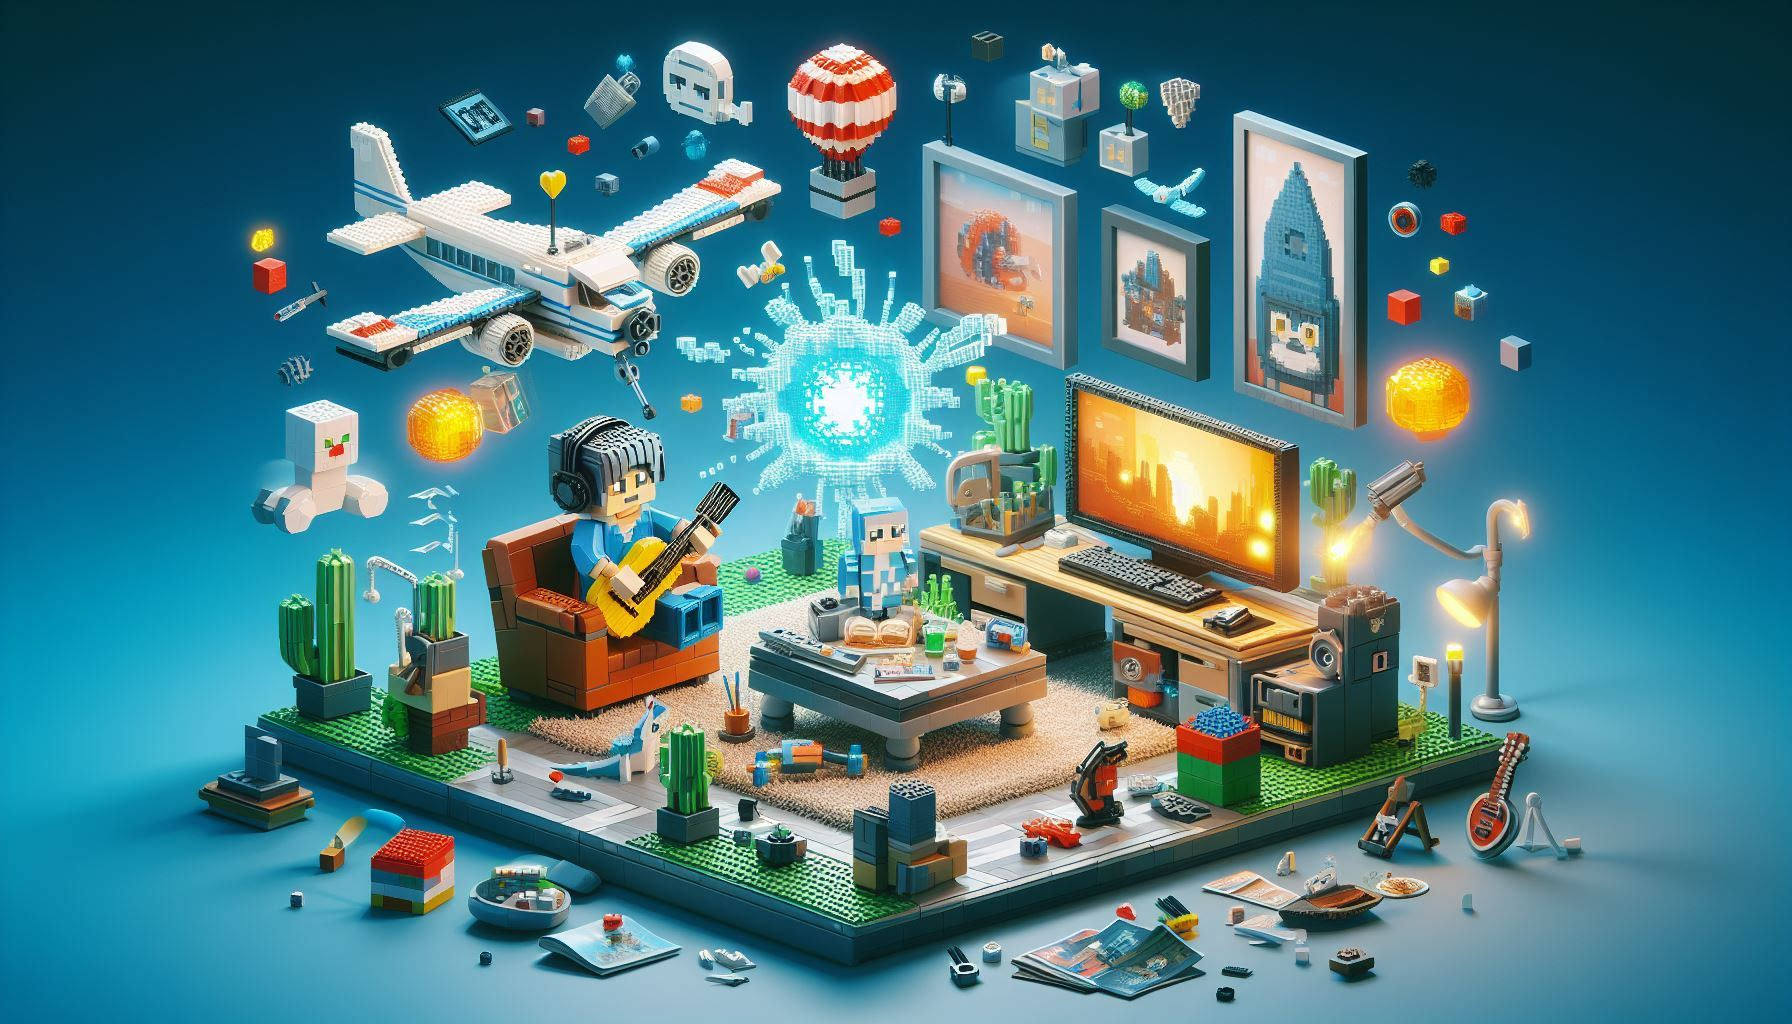 Unleash Creativity with Minecraft Lego Sets - Your Ultimate Building Guide